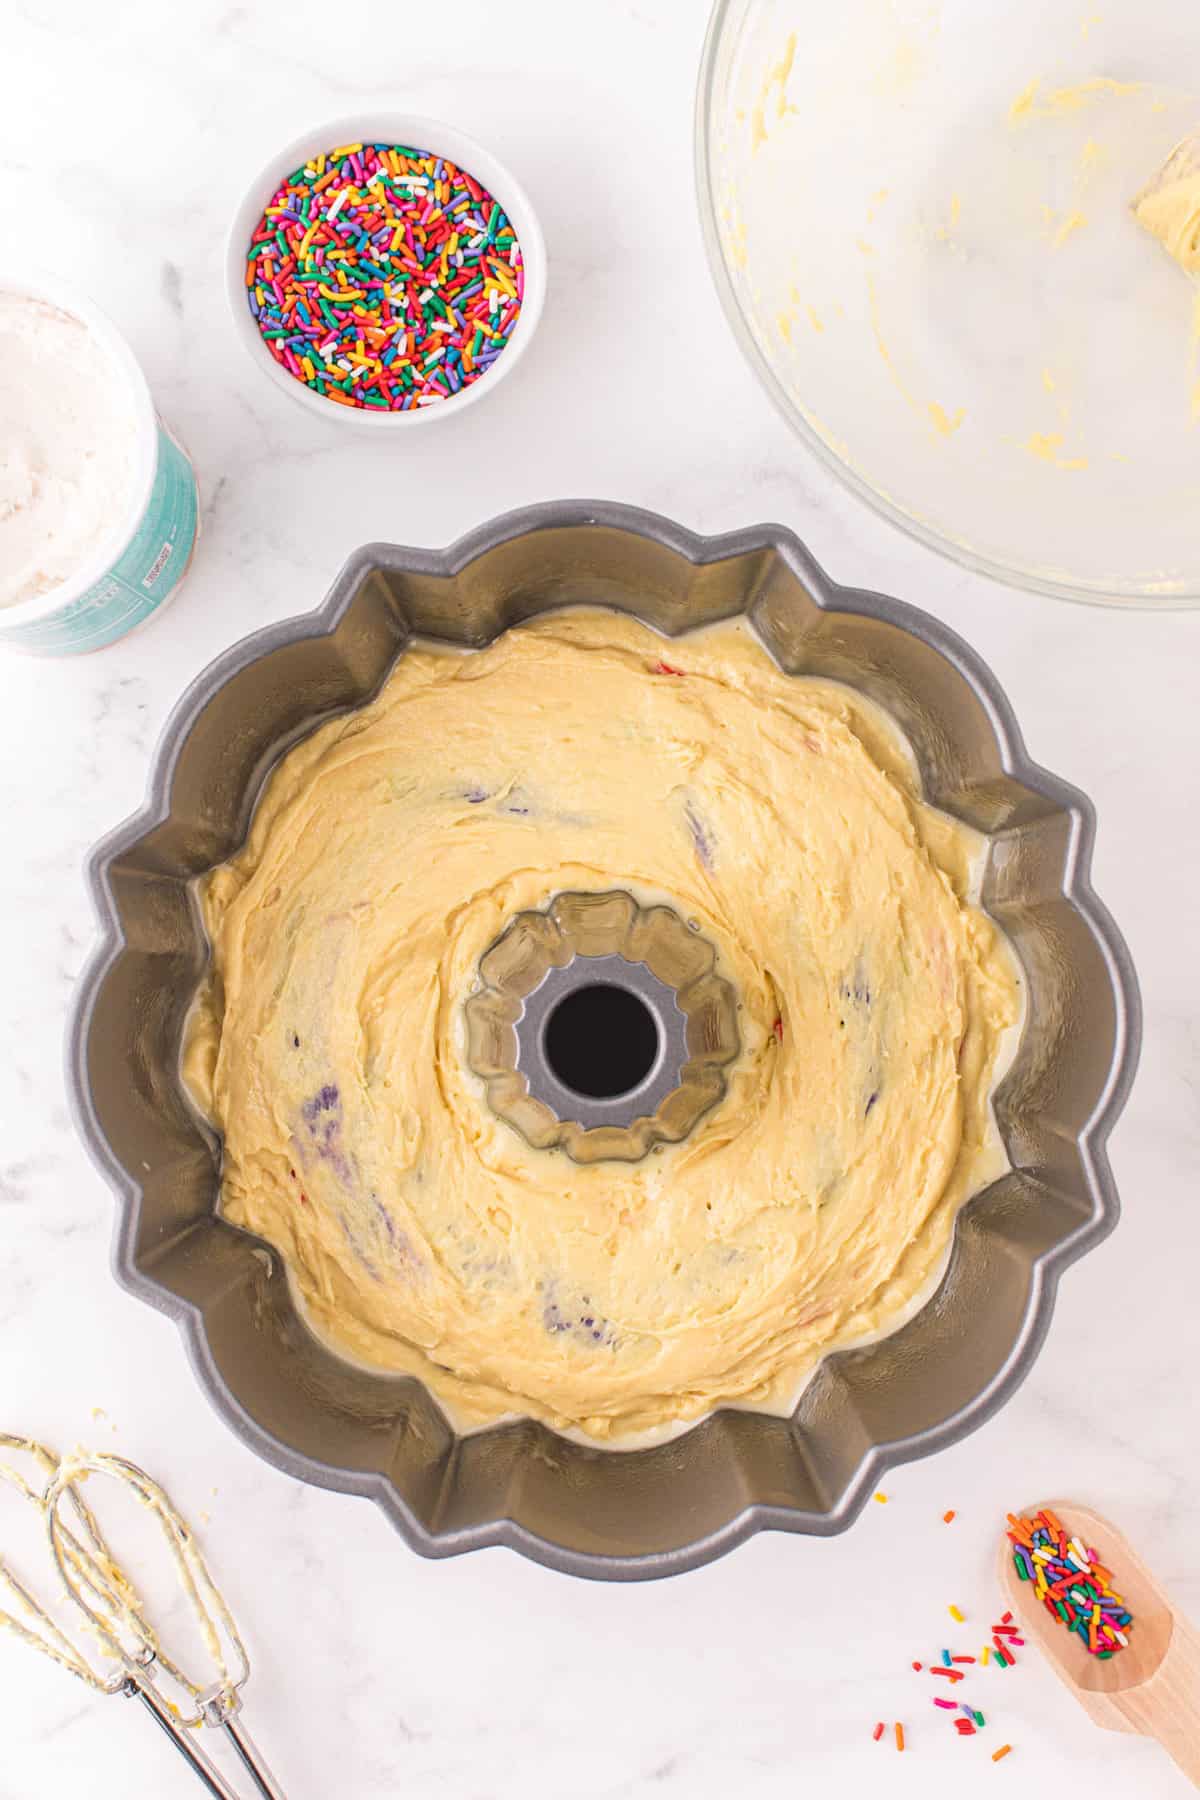 Add a layer of non-colored cake mix to the top of all of the colored cake mix and bake.